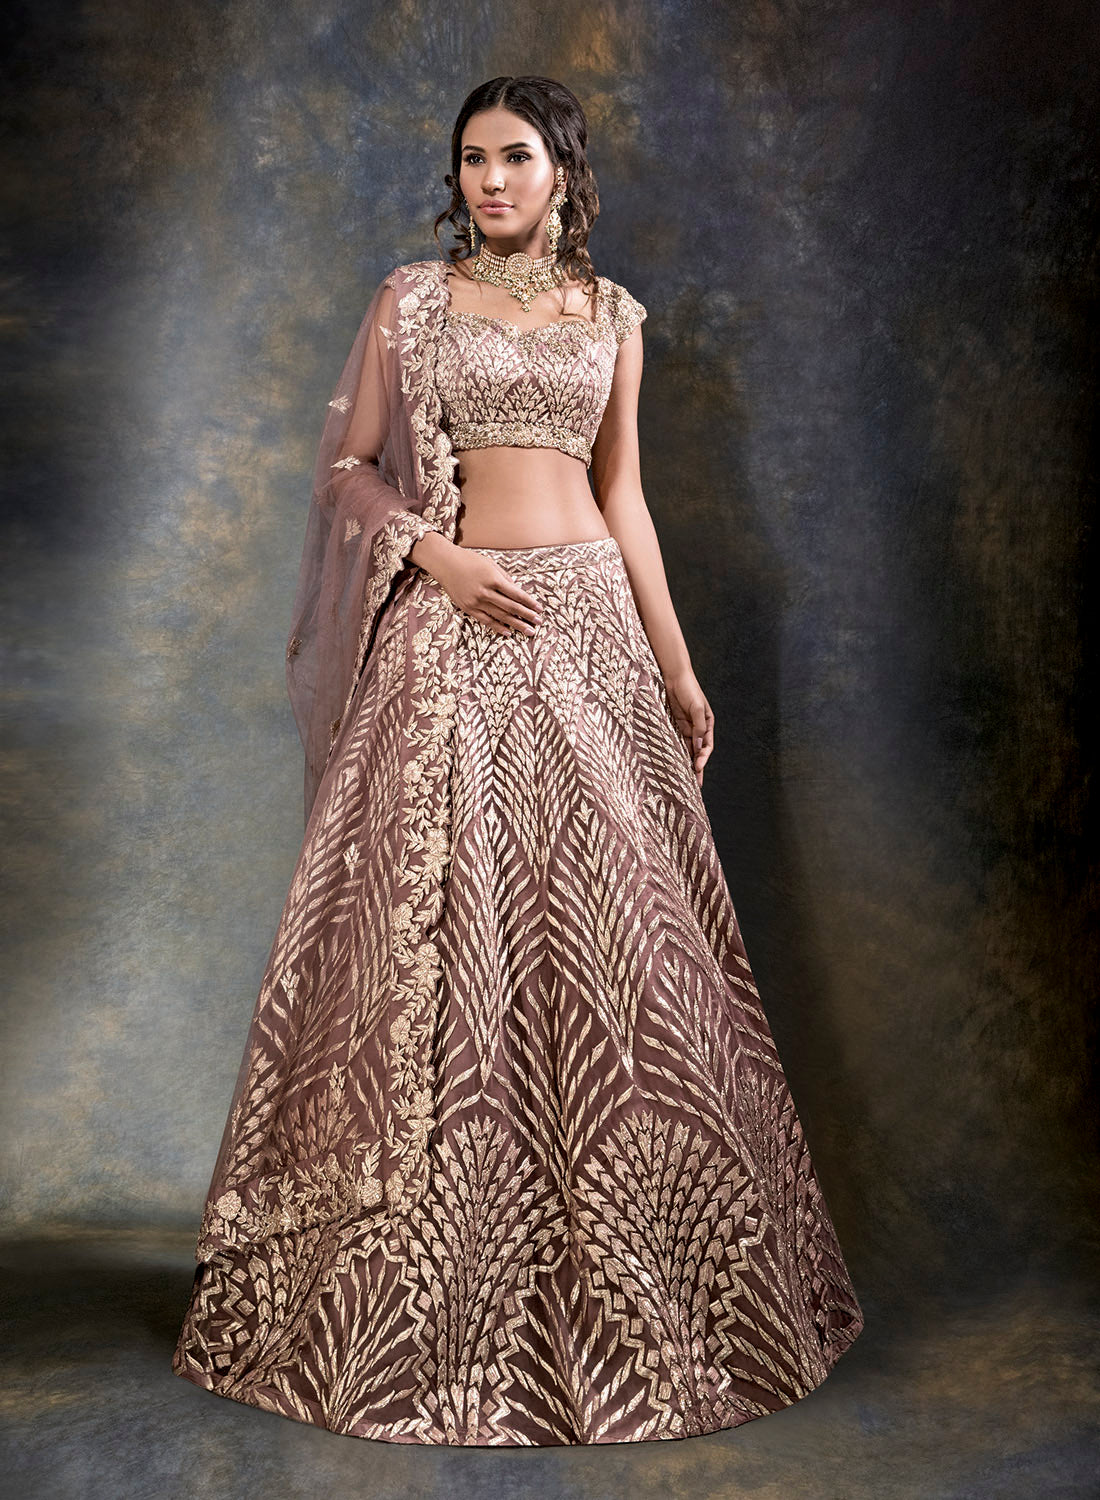 Indian Wedding Dresses - Get Free Fashion Advice for Bride in USA – Nameera  by Farooq